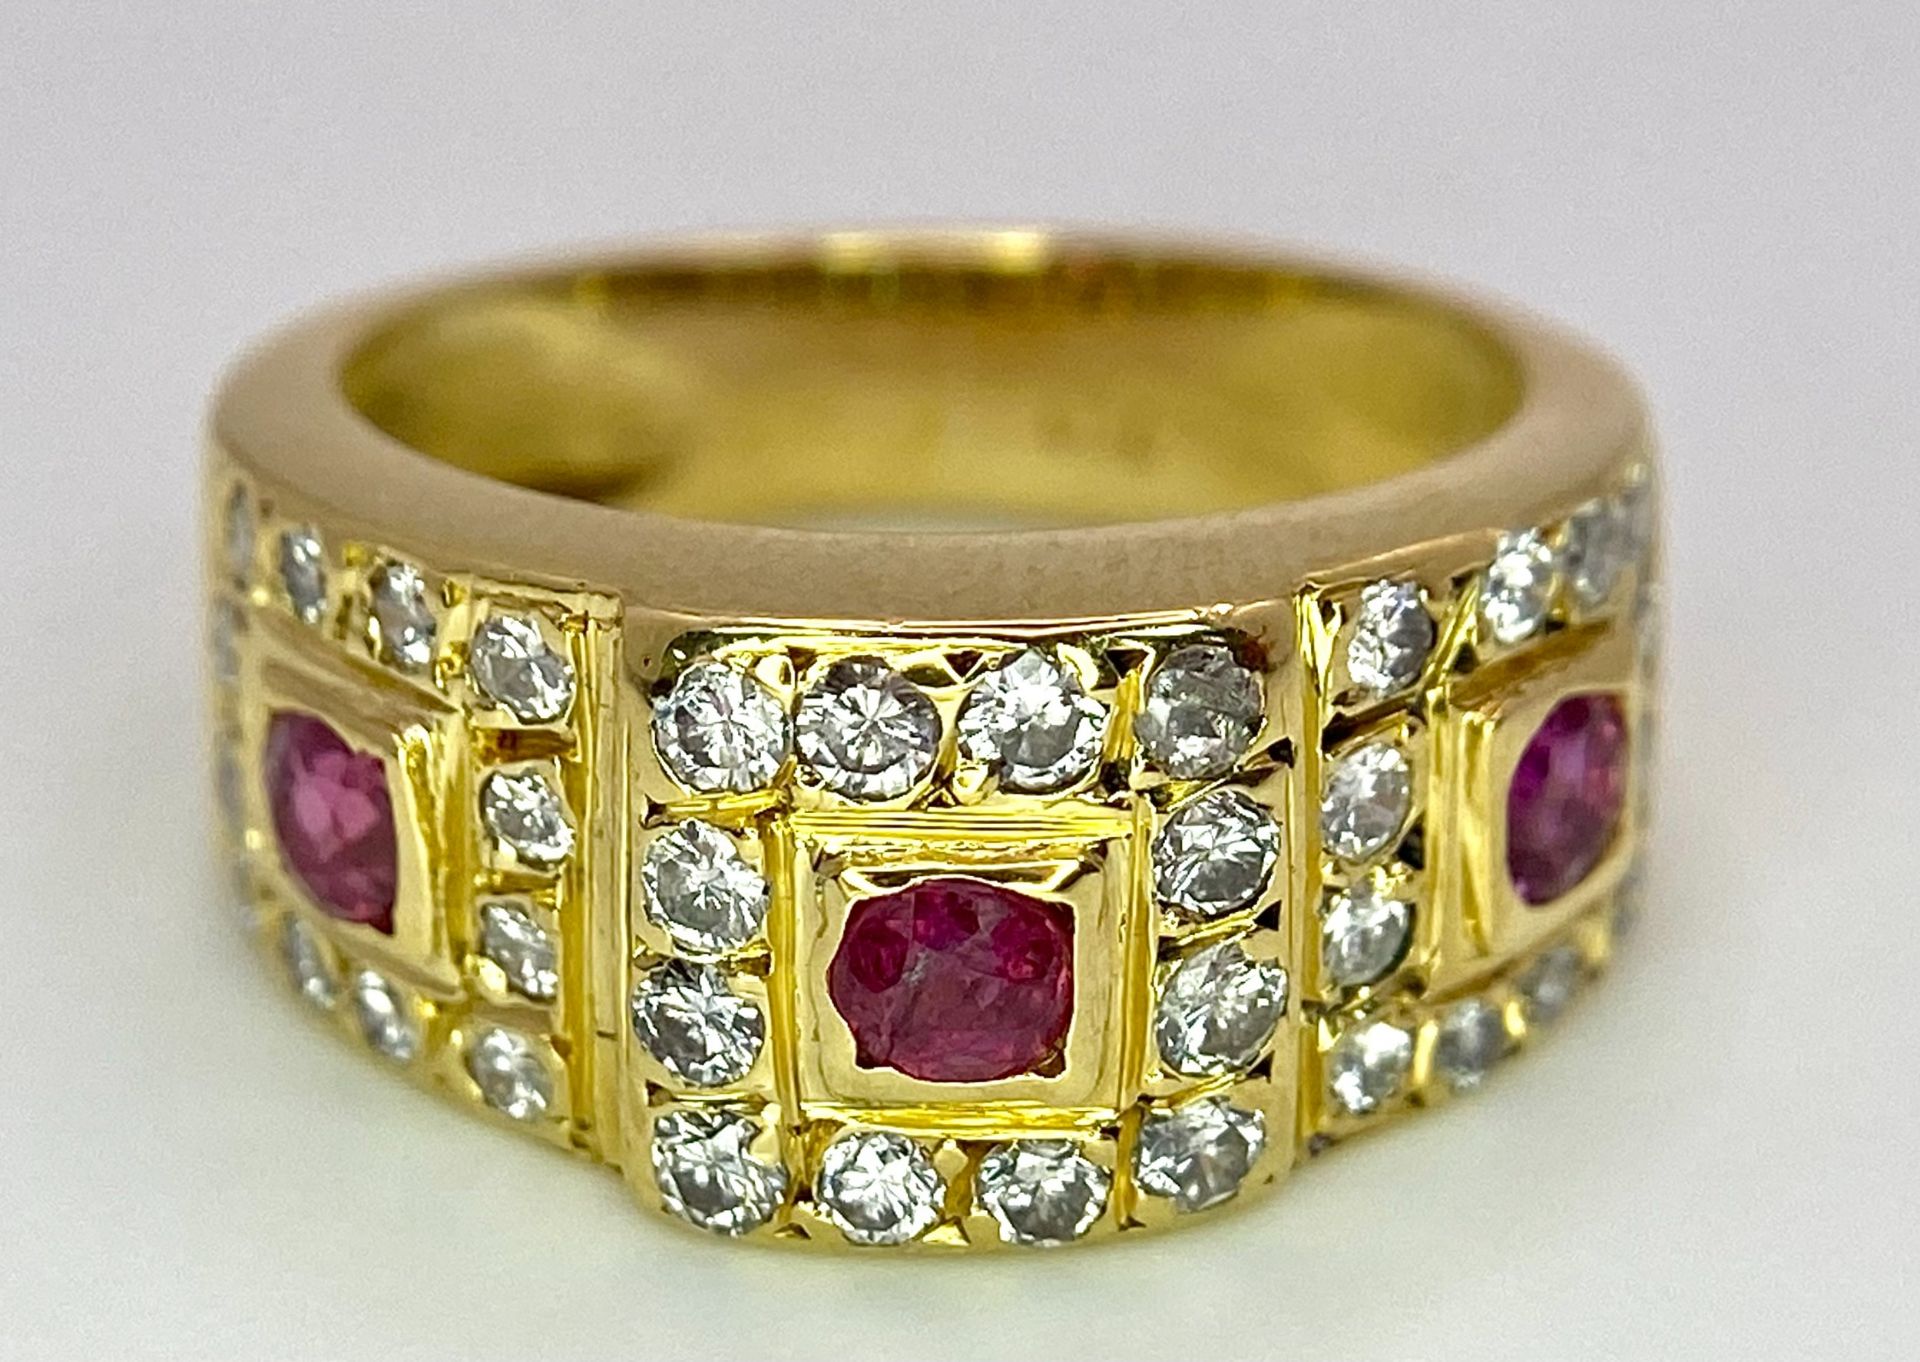 AN 18K YELLOW GOLD DIAMOND & RUBY RING. 0.60ctw, size K, 6.8g total weight. Ref: SC 8072